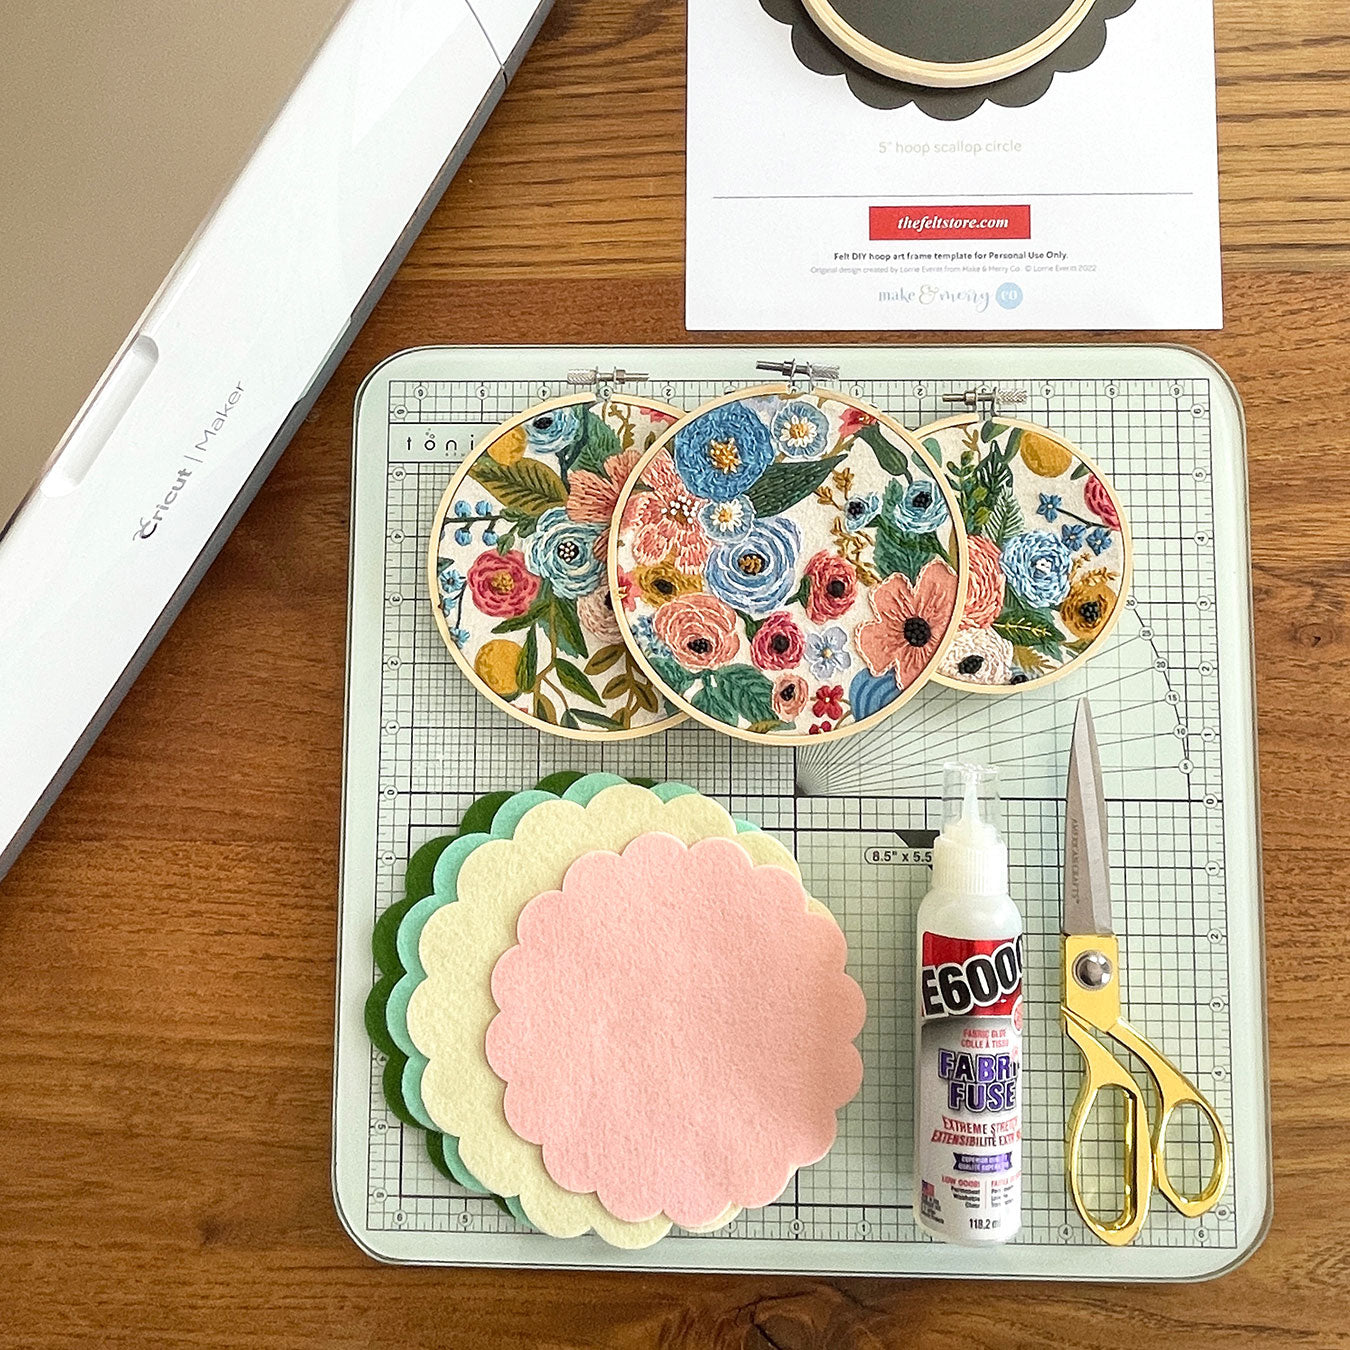 Three embroidery hoops, scalloped felt circles, scissors, and a bottle of E6000 fabric fuse lay on a small cutting mat.